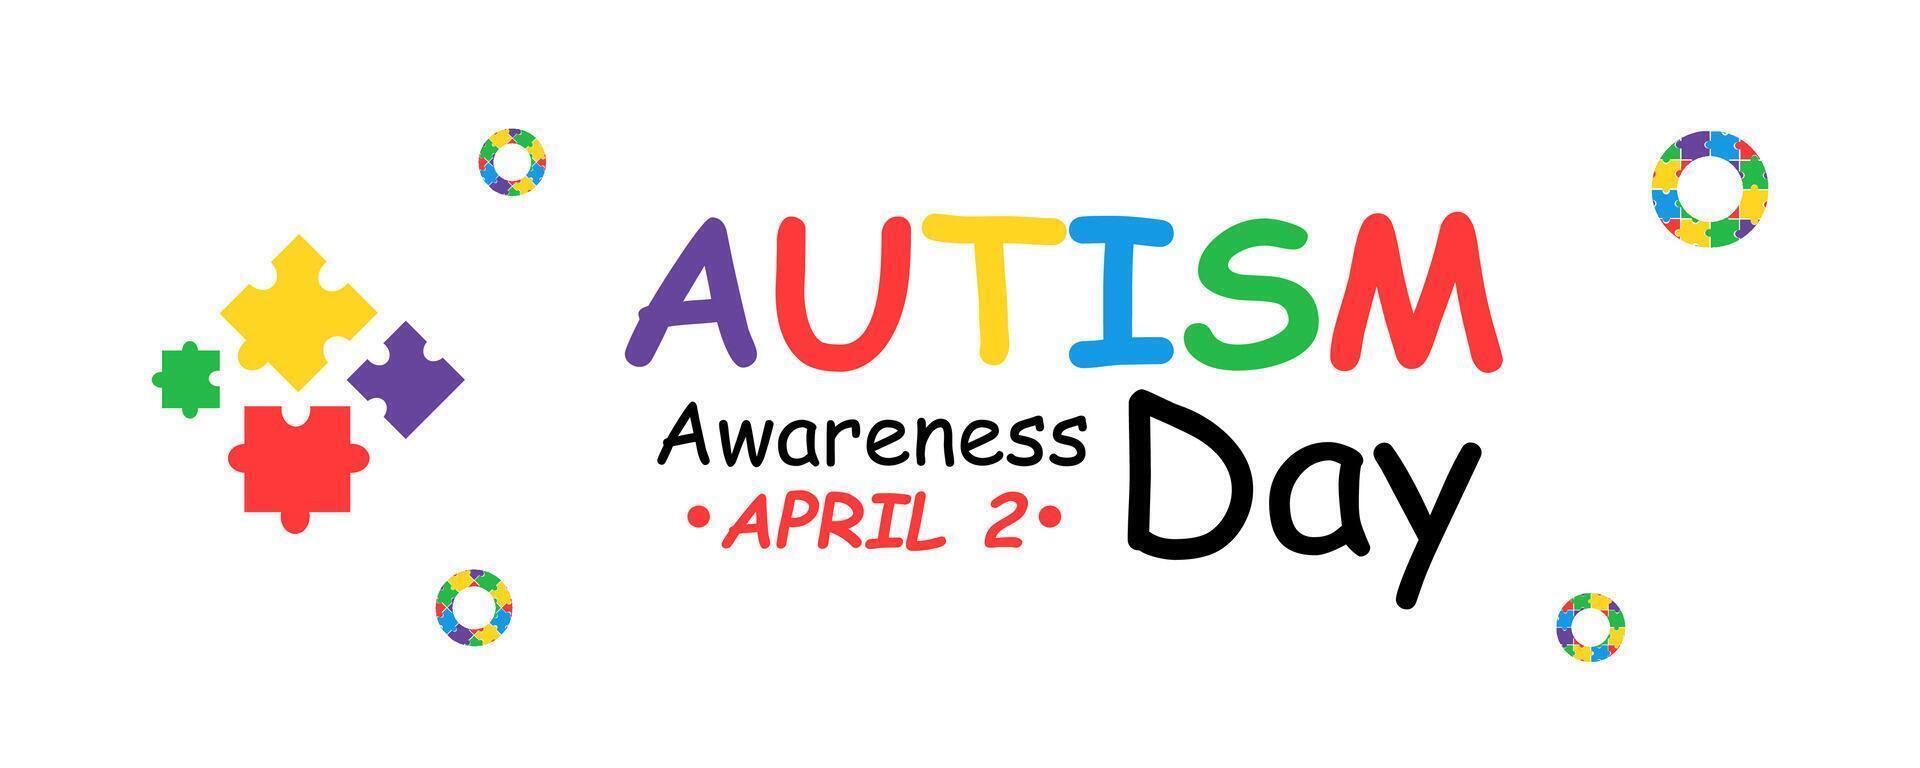 Colors puzzle concept world autism awareness day banner template illustration background design vector